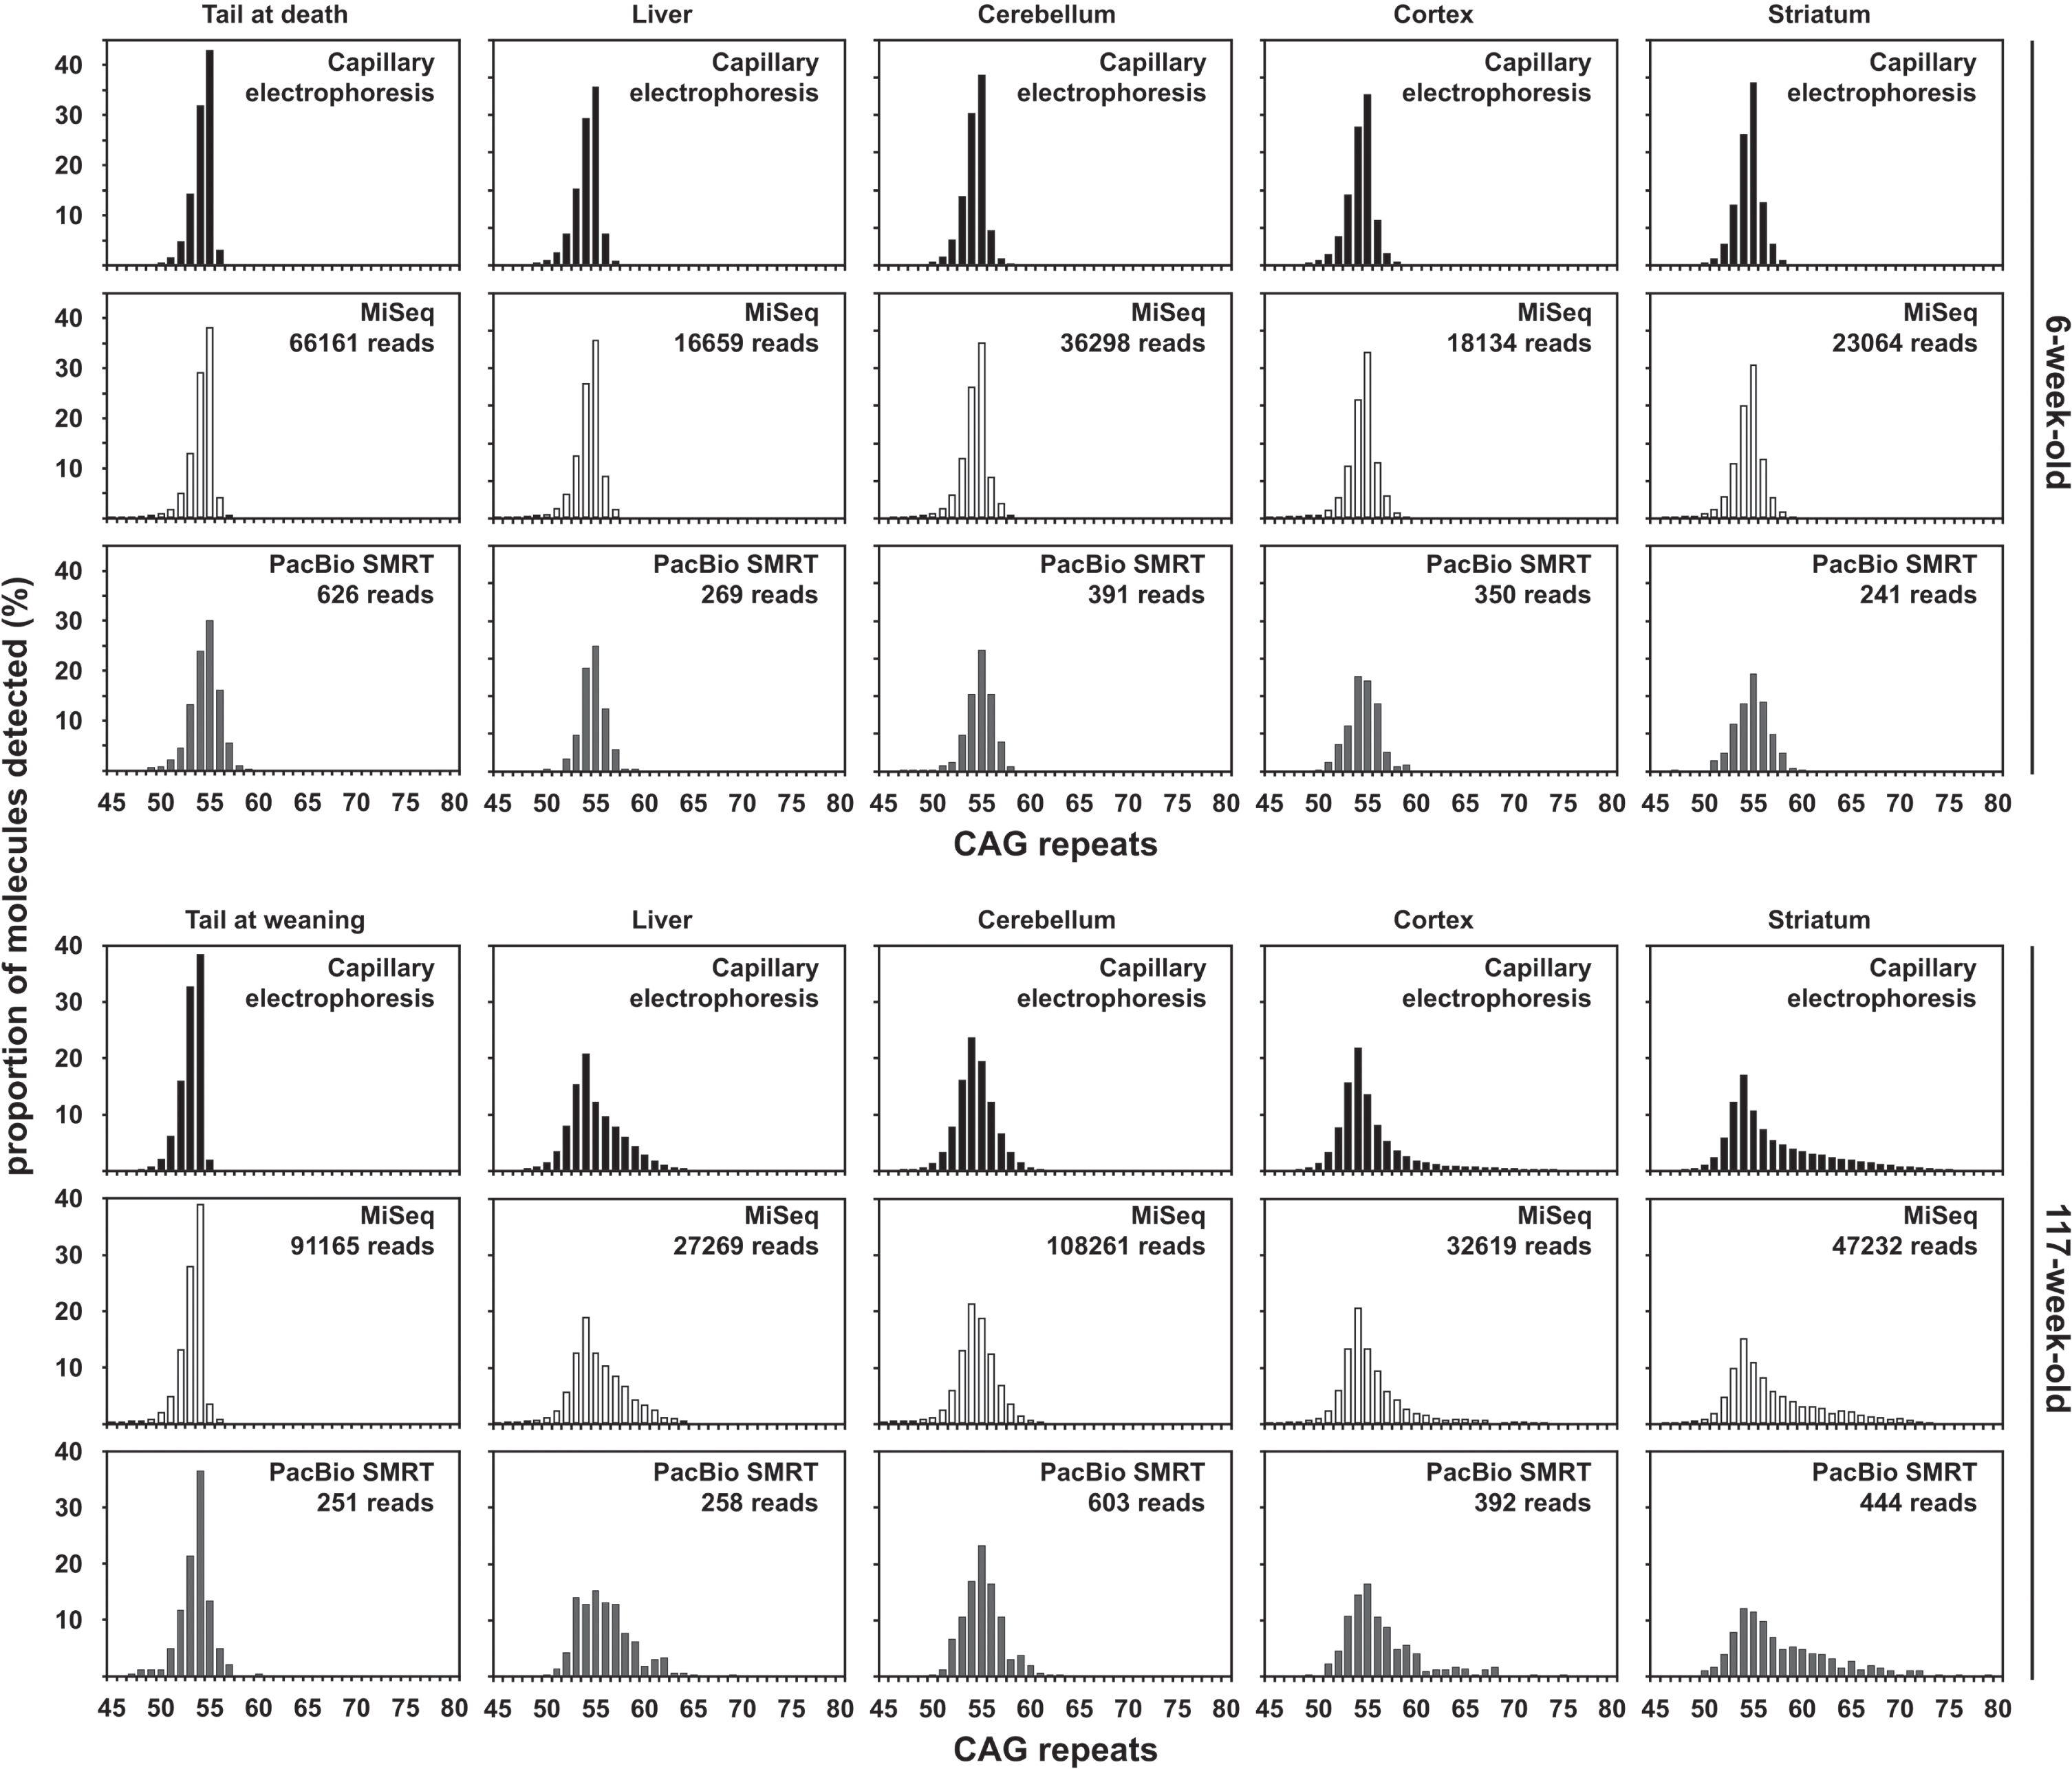 Qualitative assessment of somatic mosaicism comparing CAG frequency distributions obtained by capillary electrophoresis, MiSeq or PacBio SMRT sequencing of bulk-PCR products obtained for different tissues of one 6-week-old and one 117-week-old R6/2 mouse with ∼55 CAGs. Capillary electrophoresis data in black, MiSeq sequencing data in white and PacBio SMRT sequencing data in grey.